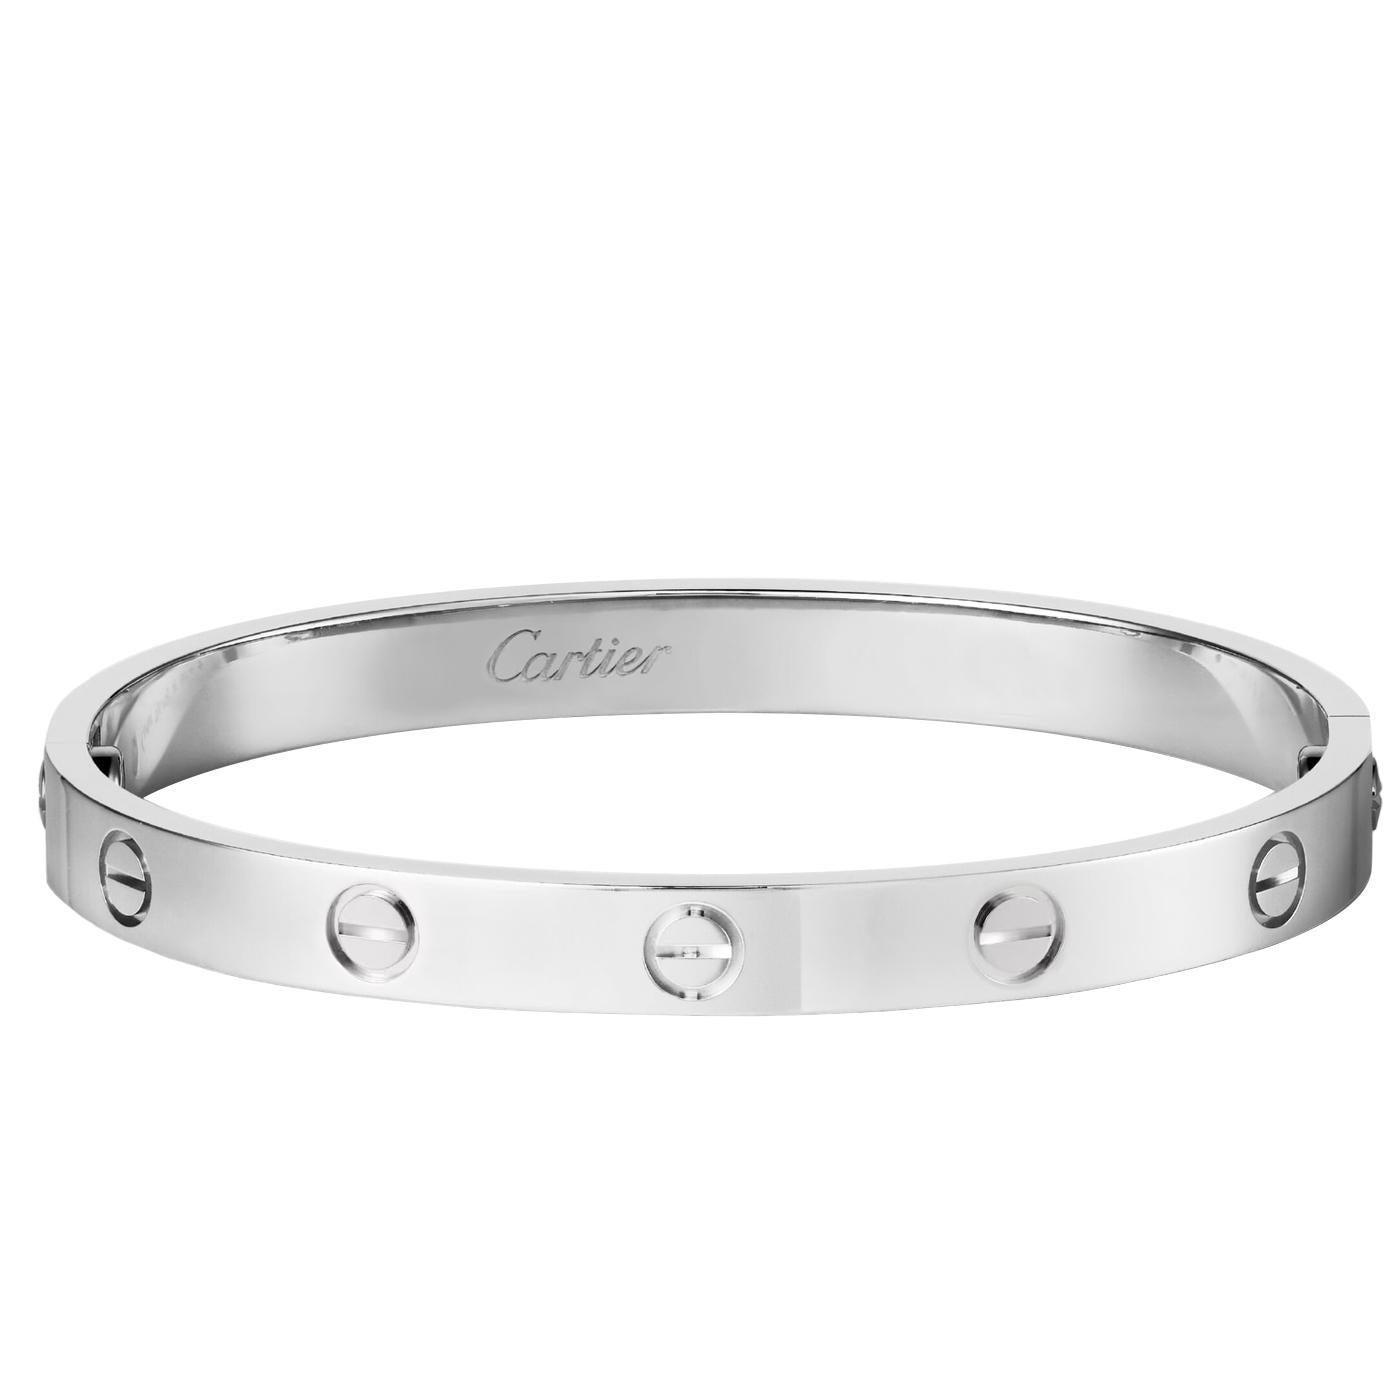 LOVE bracelet, 18K white gold 750 hallmark. Width: 6.1 mm. Created in New York, the LOVE bracelet is an icon of jewelry design: a close-fitting, oval bracelet composed of two rigid arcs that is worn on the wrist and removed using a specific